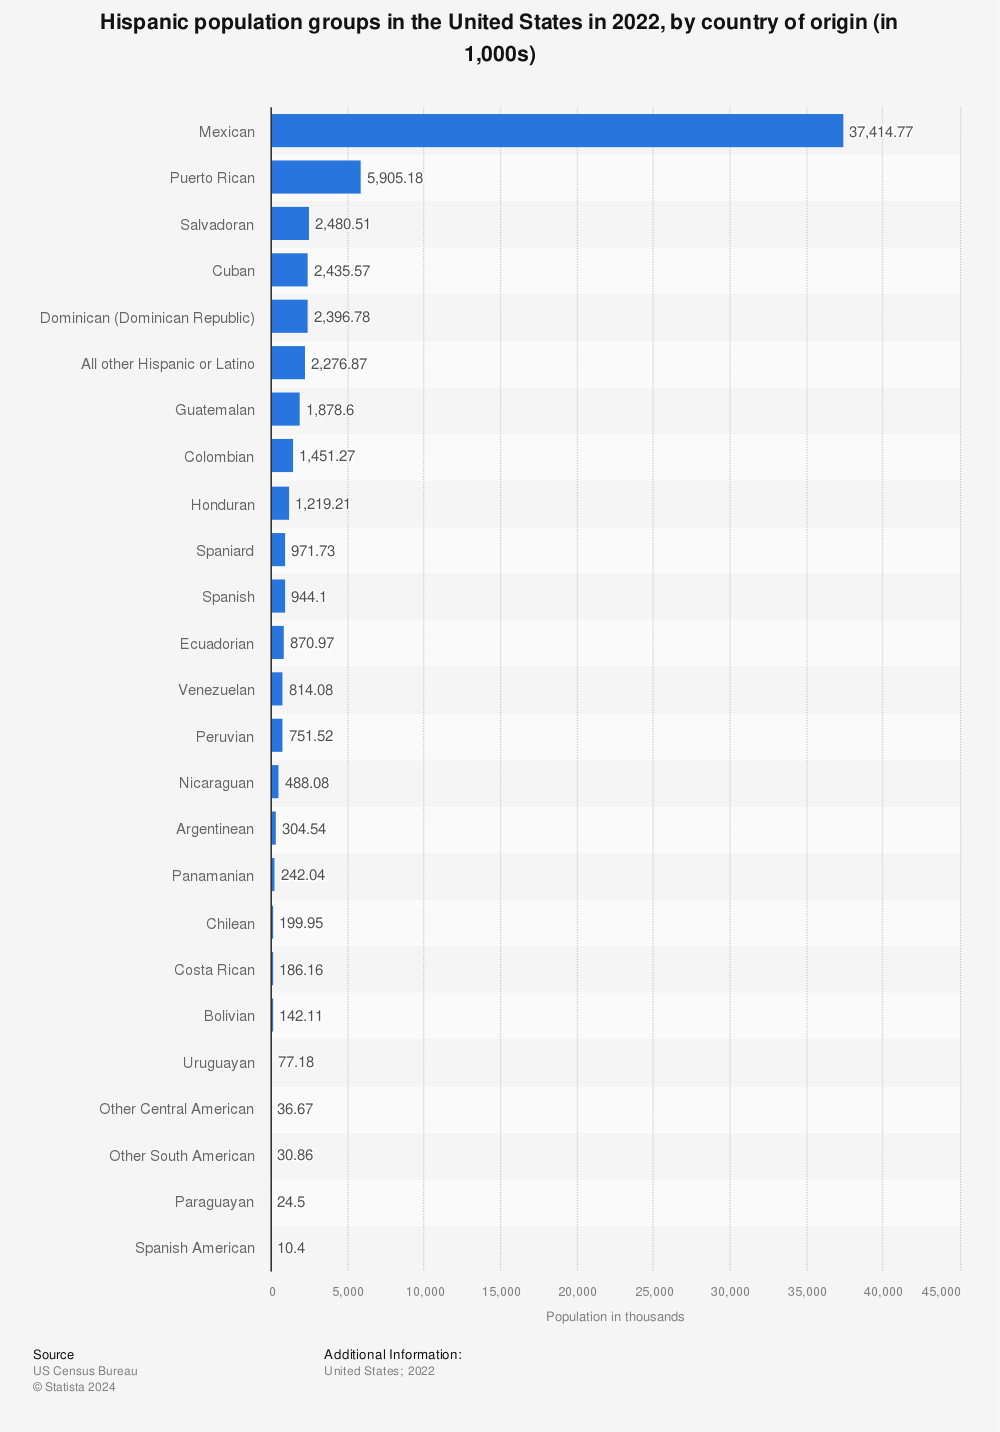 Statistic: Hispanic population groups in the United States in 2022, by country of origin (in 1,000s) | Statista